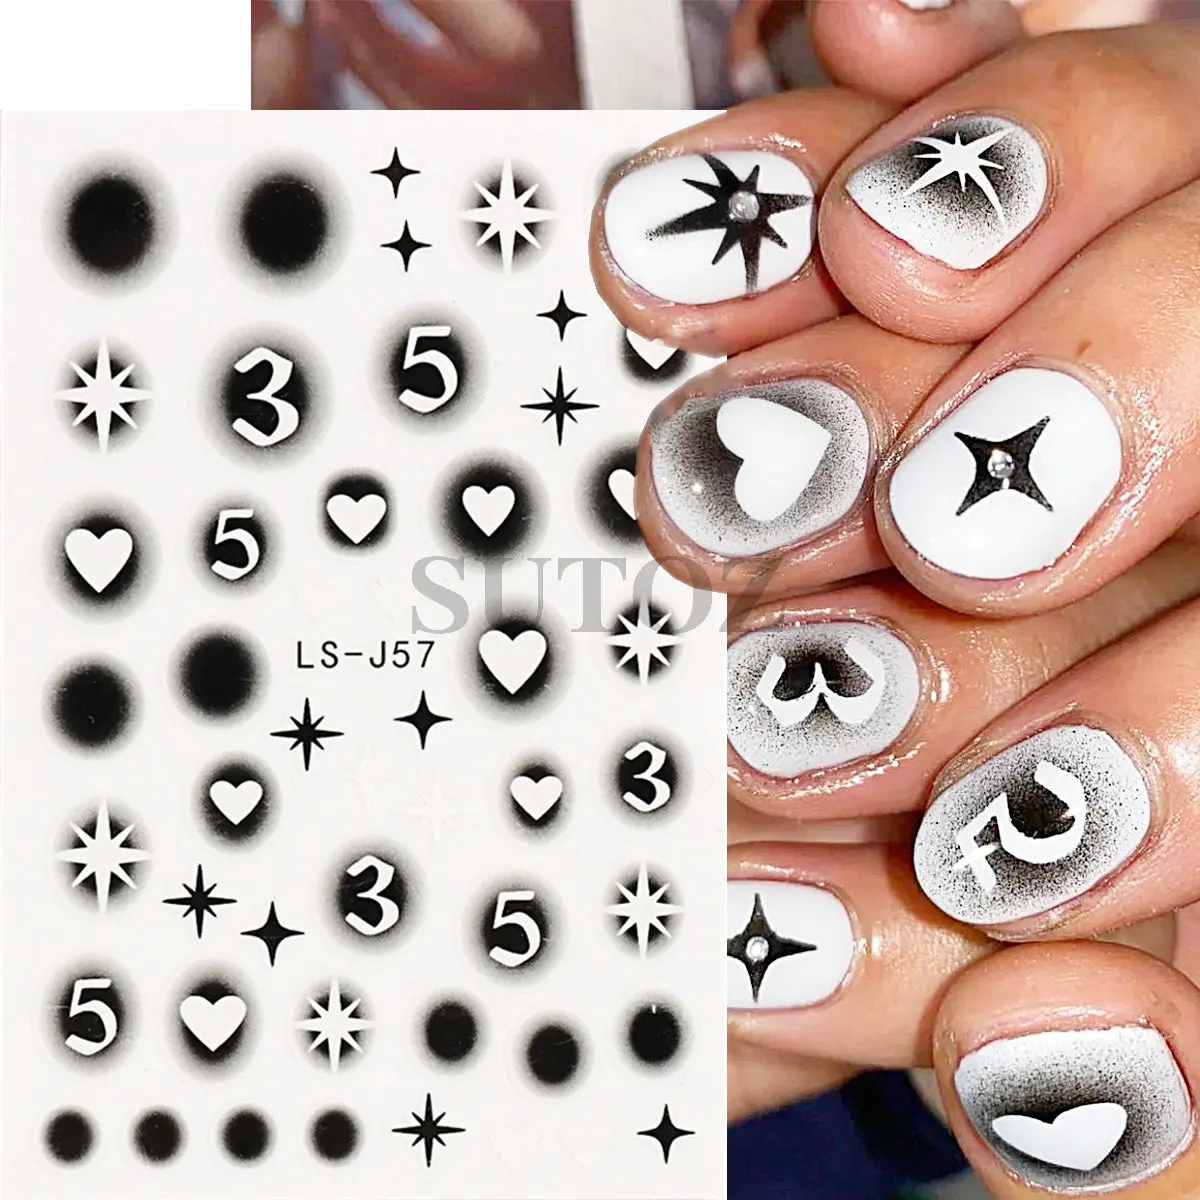 10 Sheets Airbrush Nail Stencils Stickers for Nail Art, 3D Self-Adhesive  Butterfly Heart Snowflake French Design Hollow Printing Template Stencil  Nail